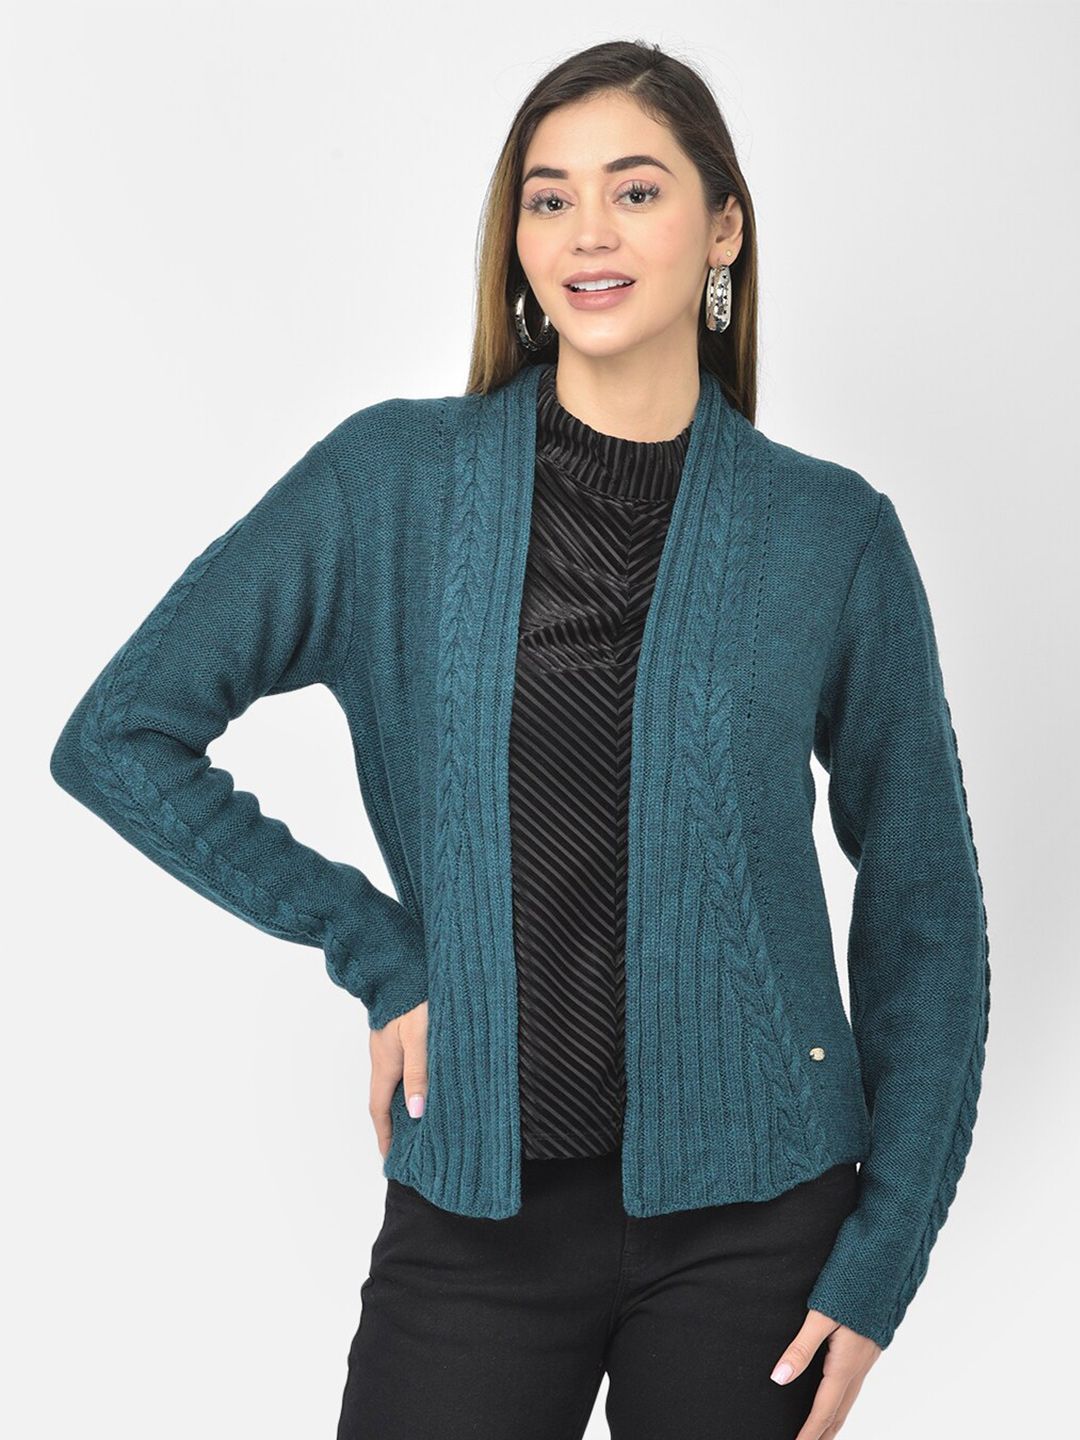 Latin Quarters Women Teal Cable Knit Acrylic Shrug Price in India